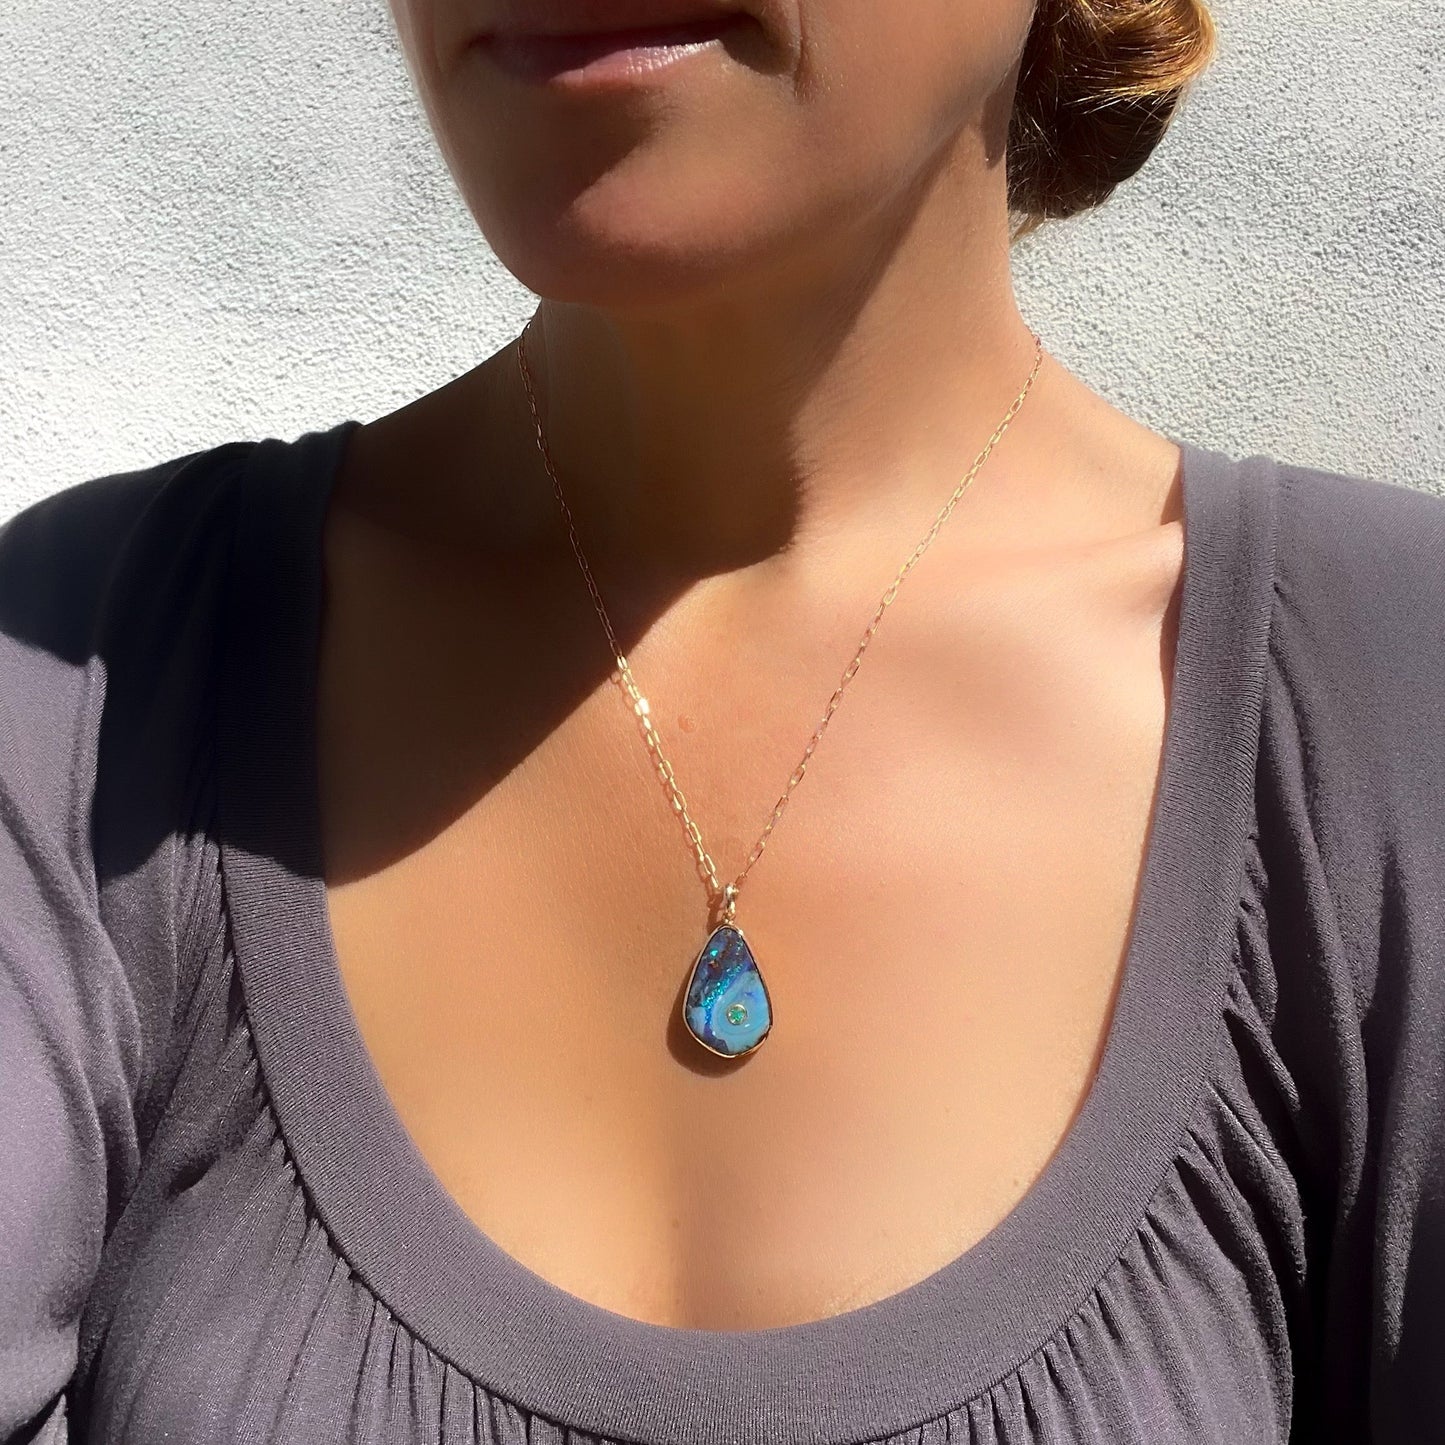 Model wearing an Australian Opal Necklace. Made in 14k rose gold with an emerald and Boulder Opal.